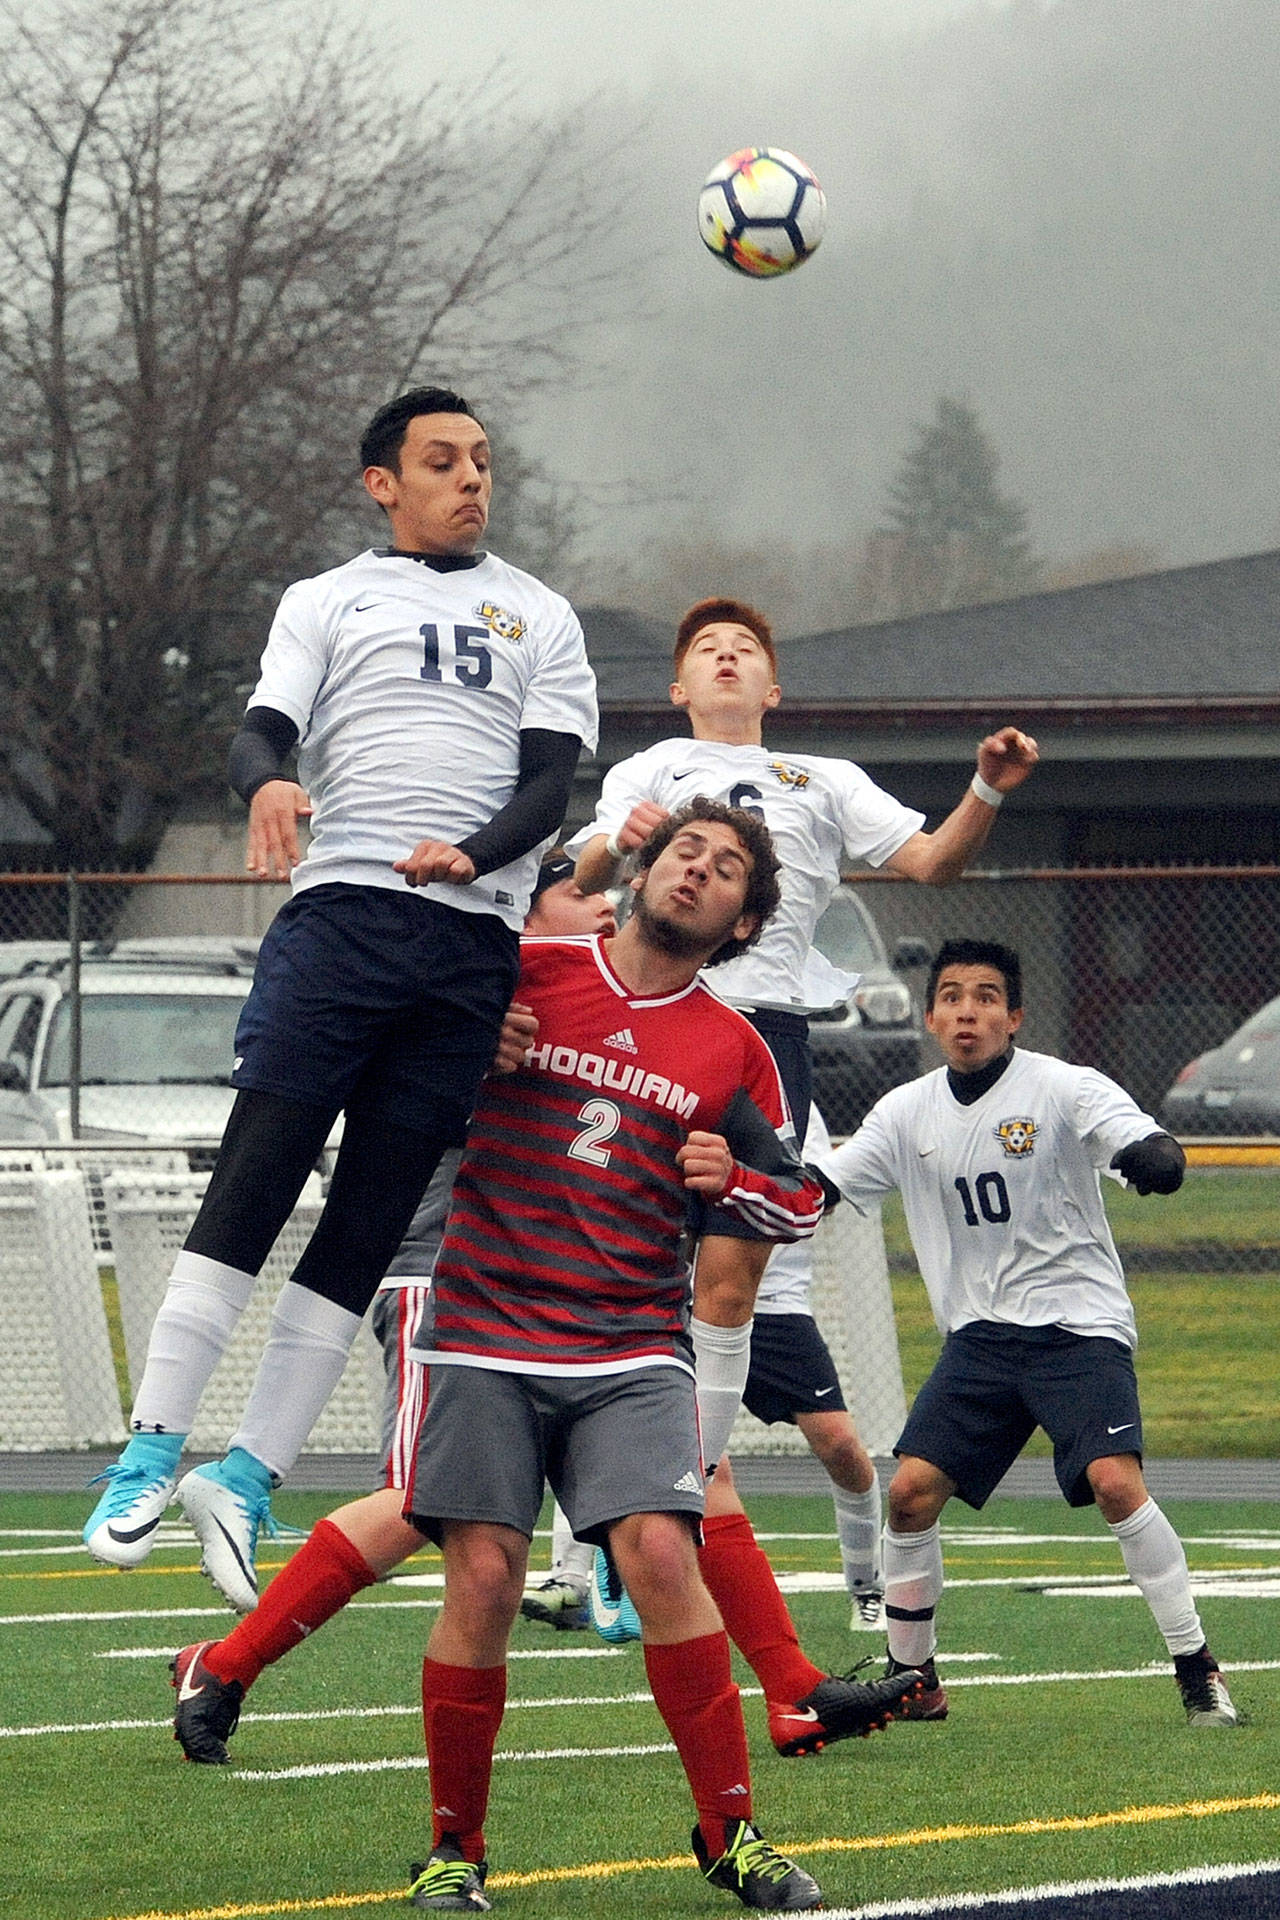 Forks’ Aristeo Weed (15), Oscar Gonzalez (6), and Samuel Gomez (10) compete with Hoquiam’s James Courneya (2) in front of the net during the Spartans’ 4-2 win over the Grizzlies on Monday night at Spartan Stadium. (Lonnie Archibald/for Peninsula Daily News)